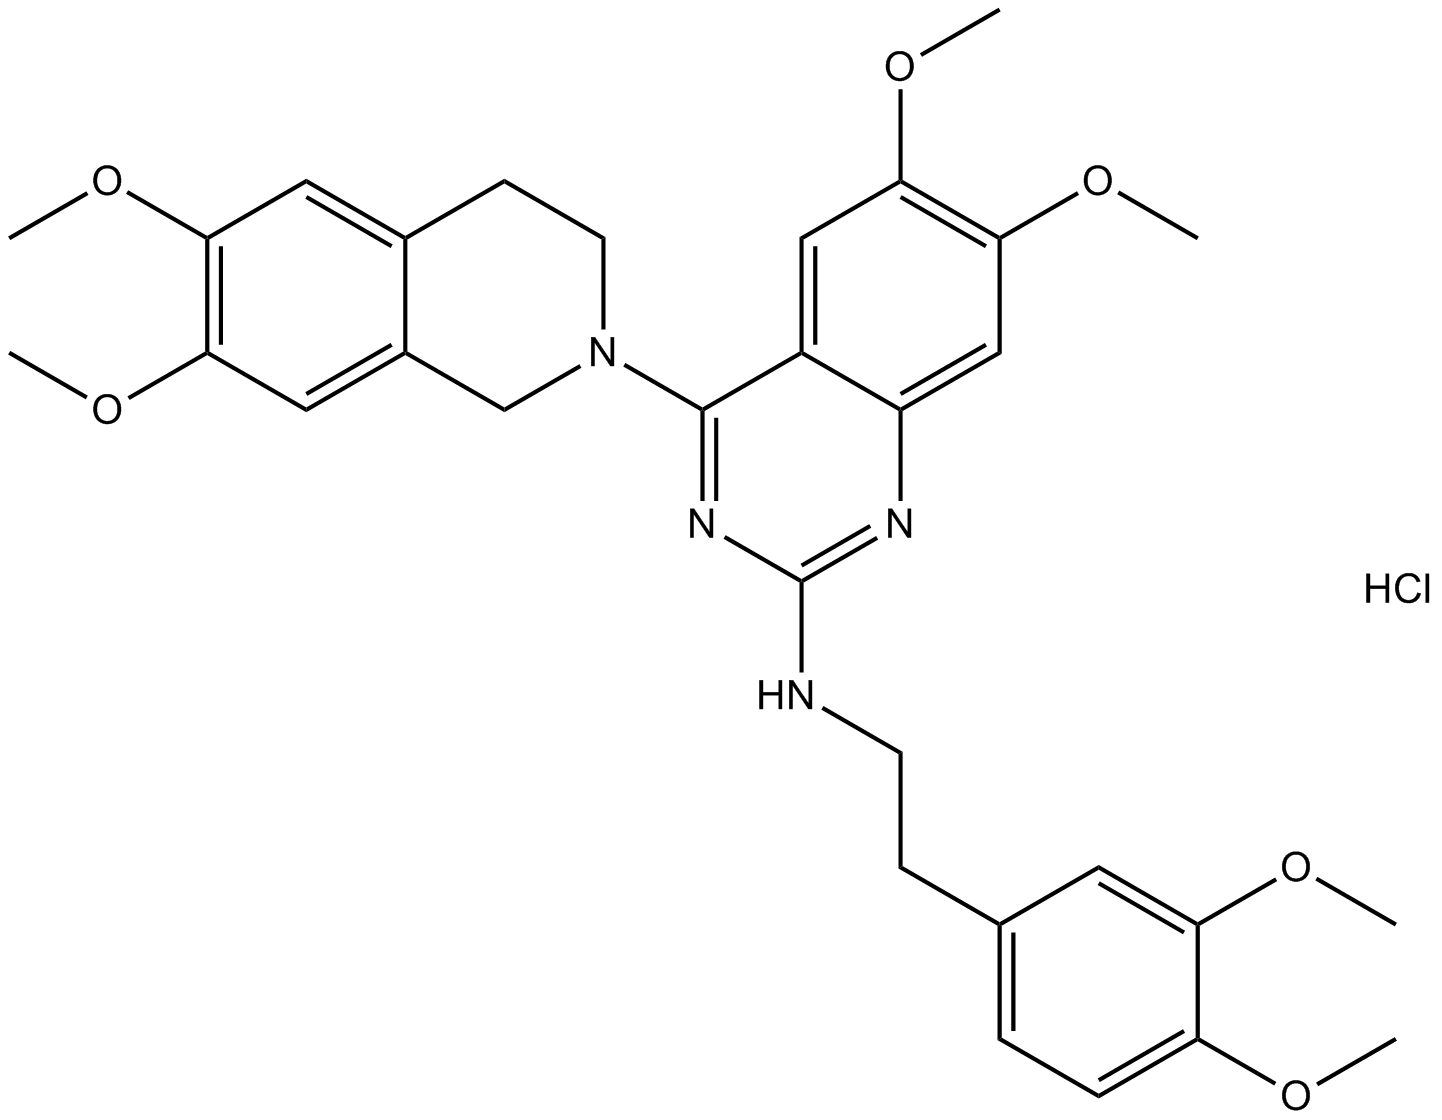 CP 100356 hydrochloride  Chemical Structure